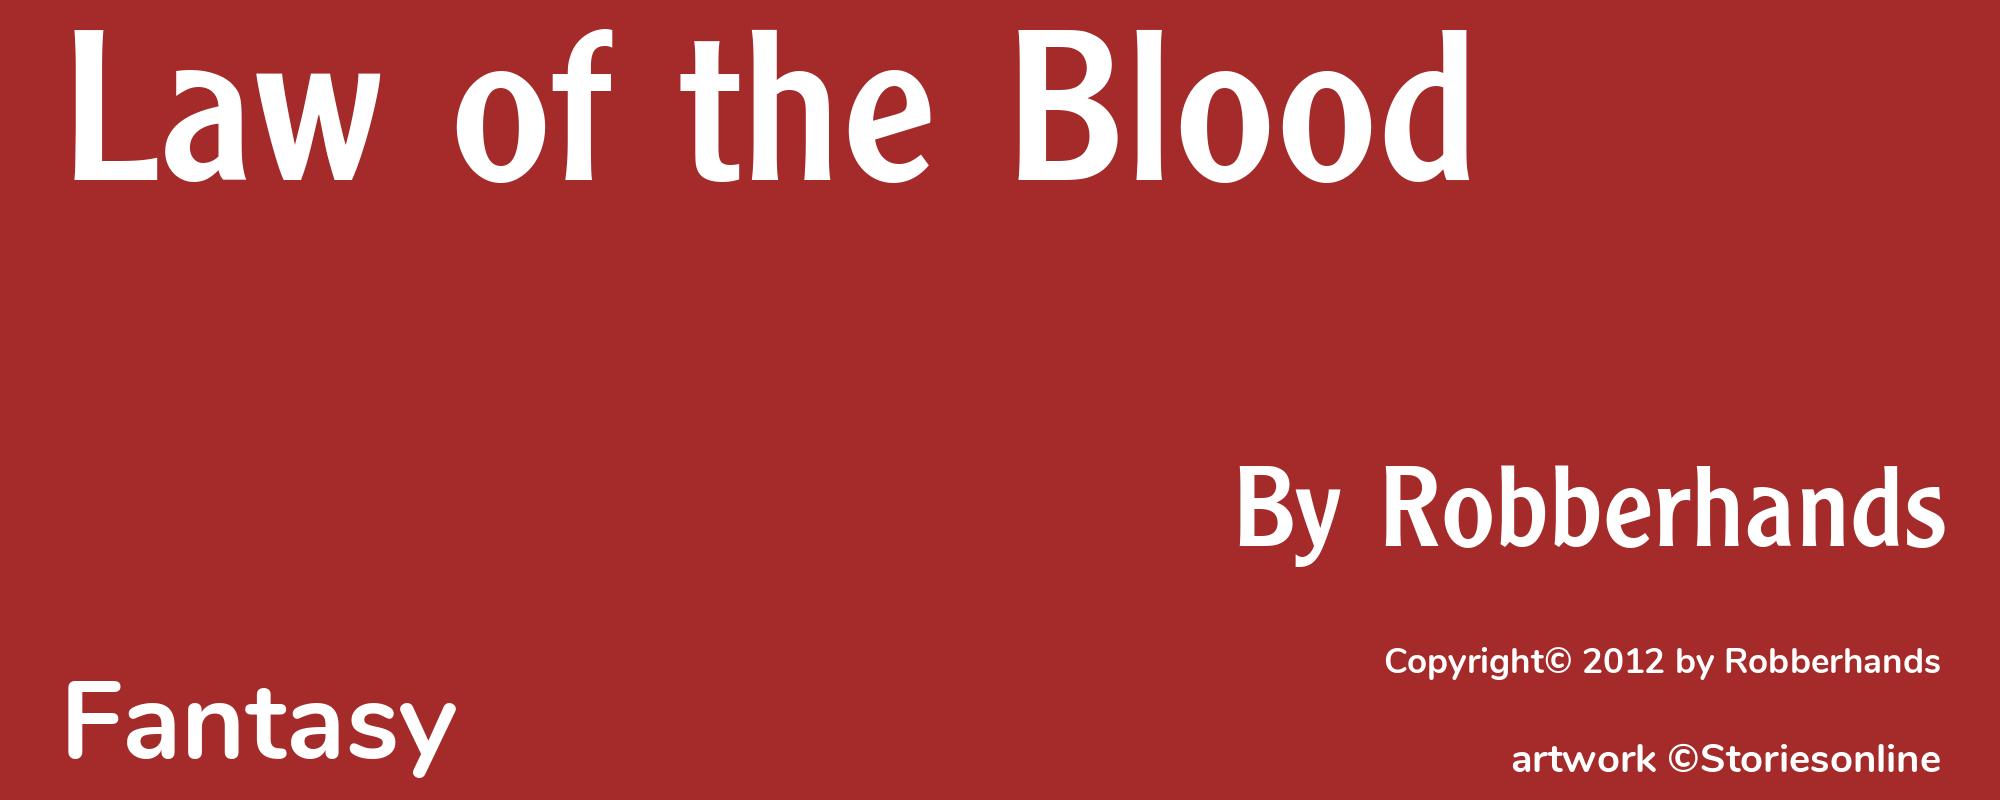 Law of the Blood - Cover